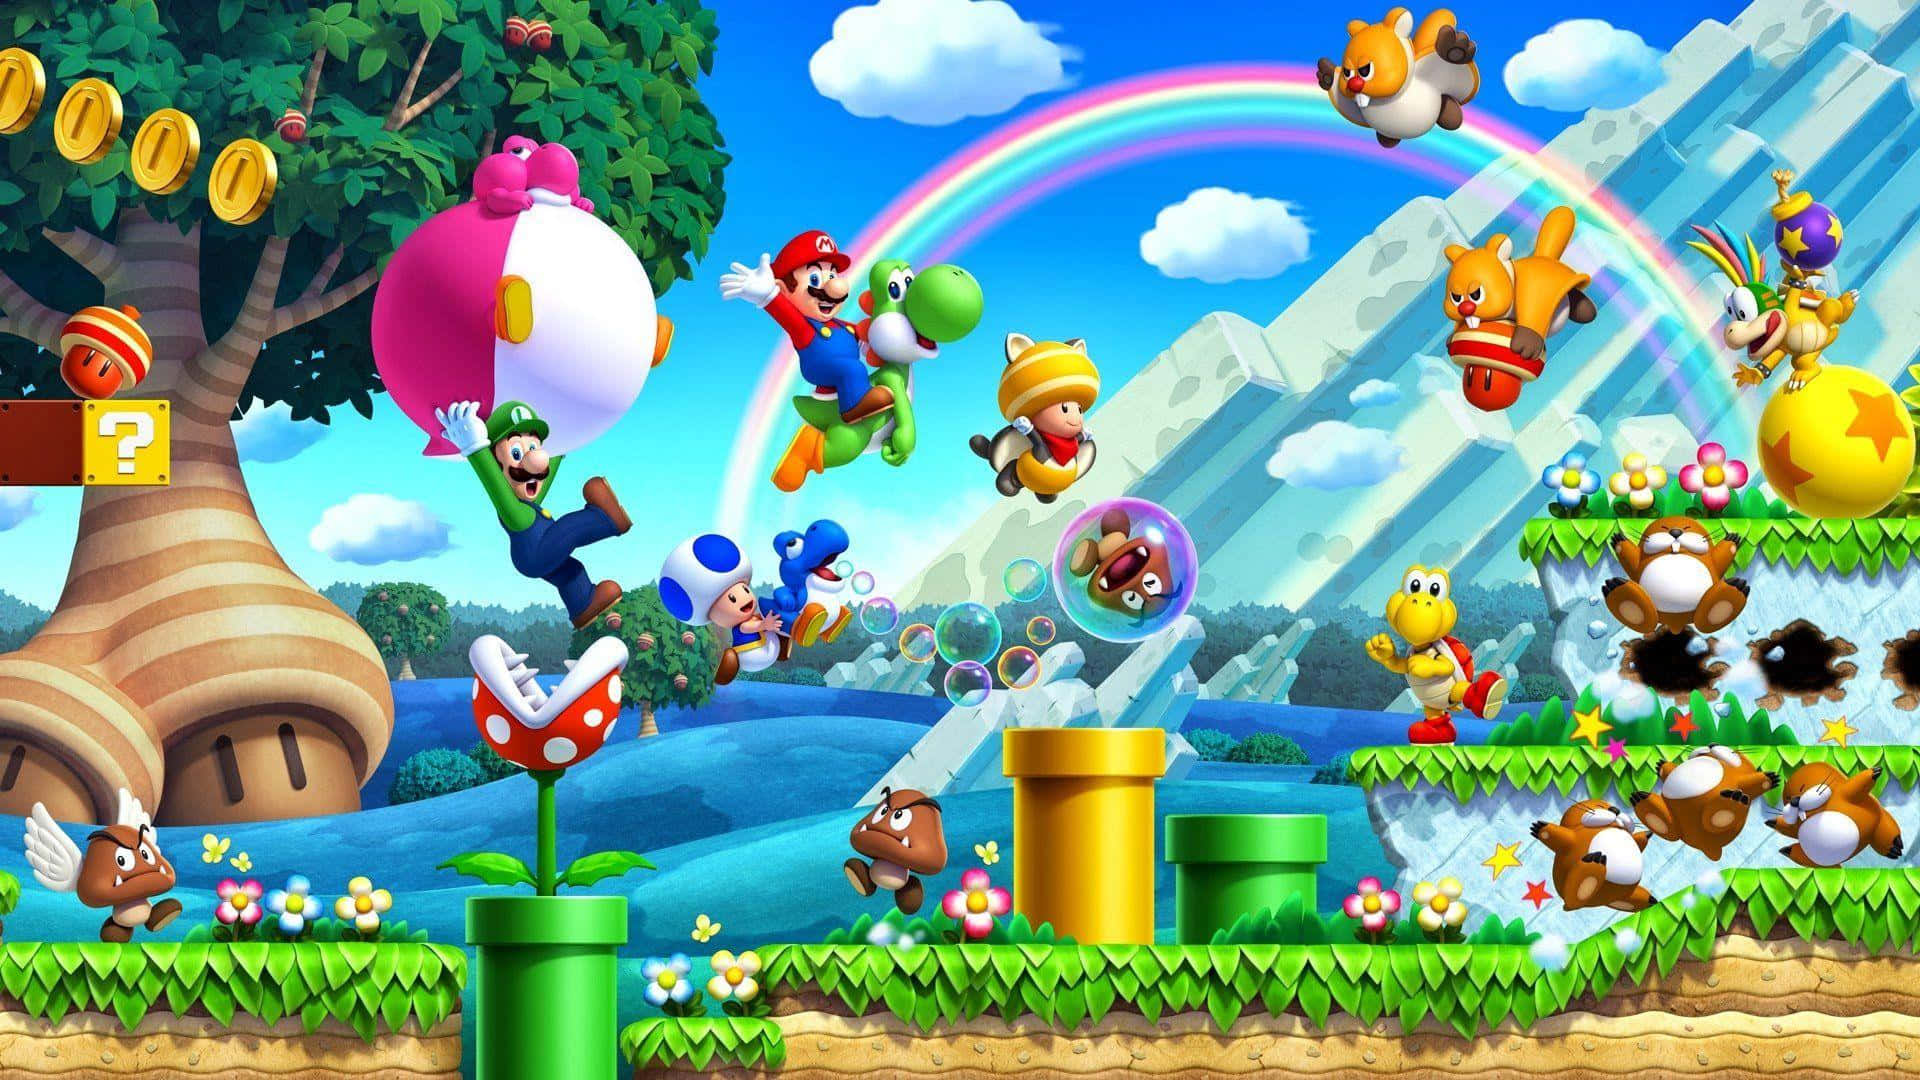 "Take on every challenge with Mario and friends!"